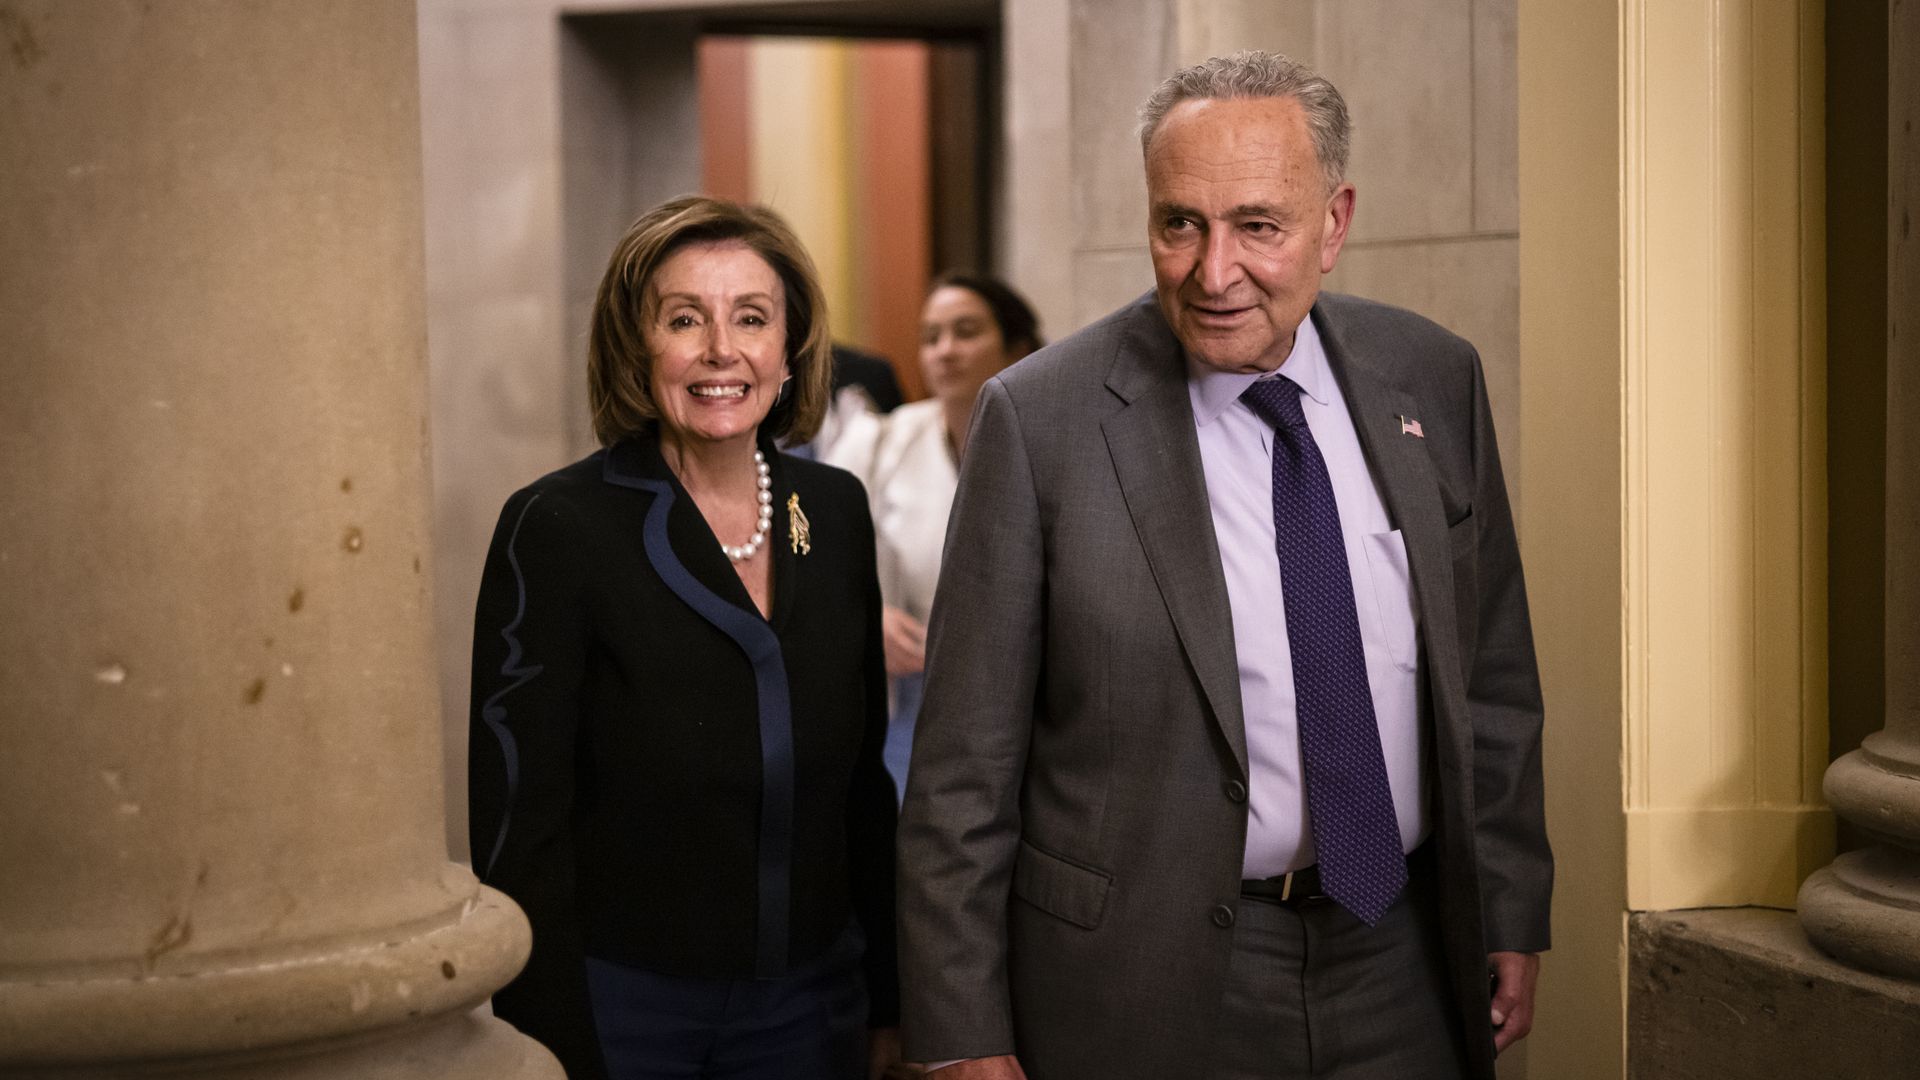 Pelosi, Schumer at White House agree to address climate crisis goals